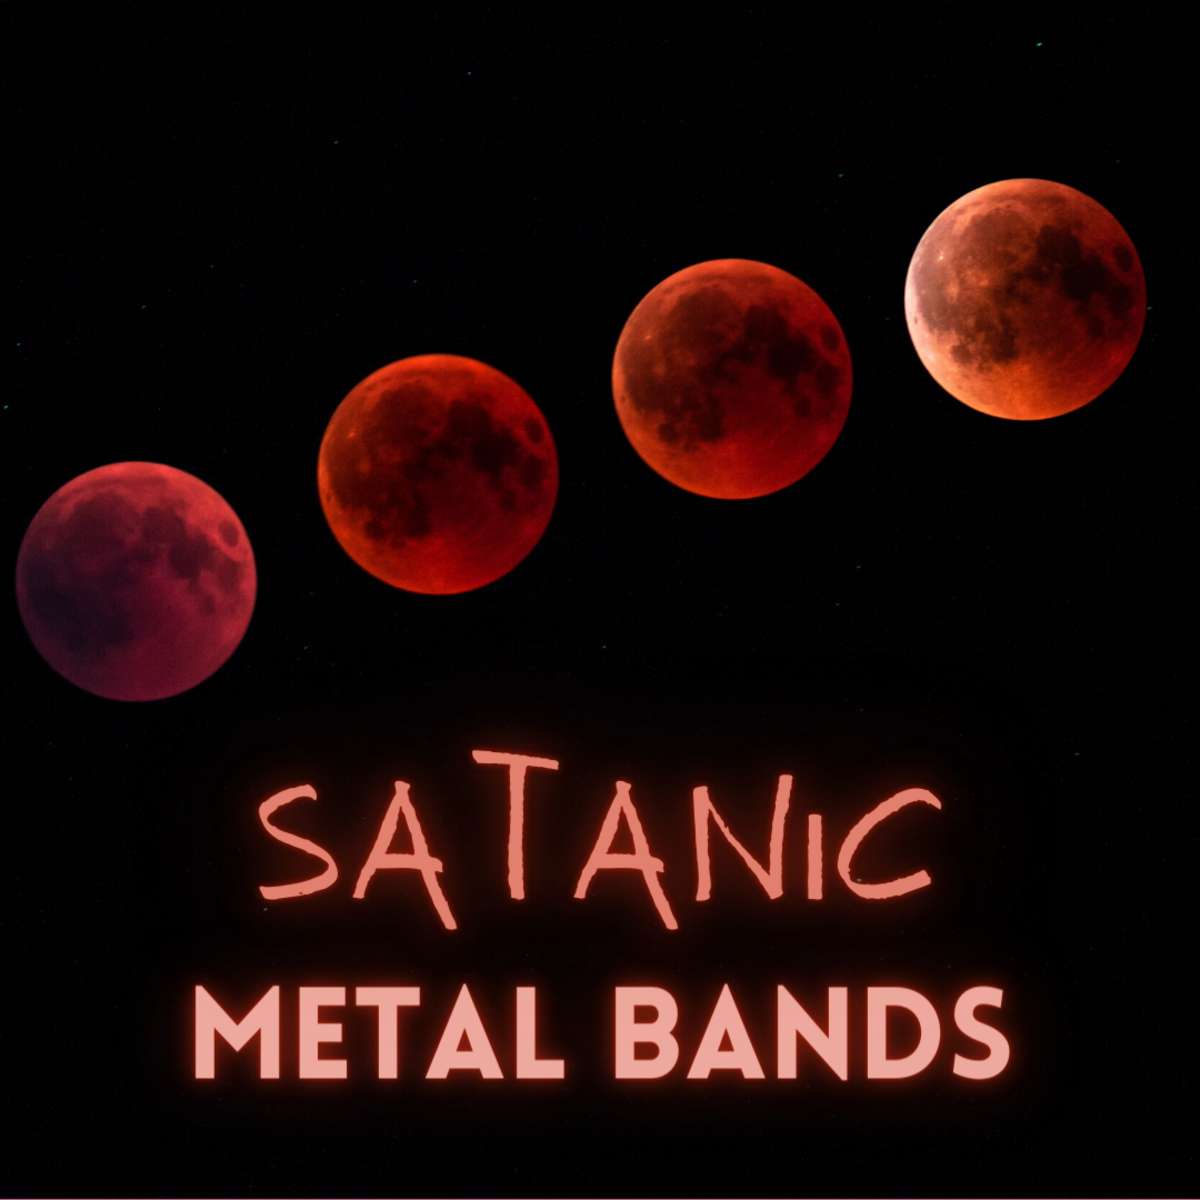 Here are the top 8 Satanic metal bands you should listen to!